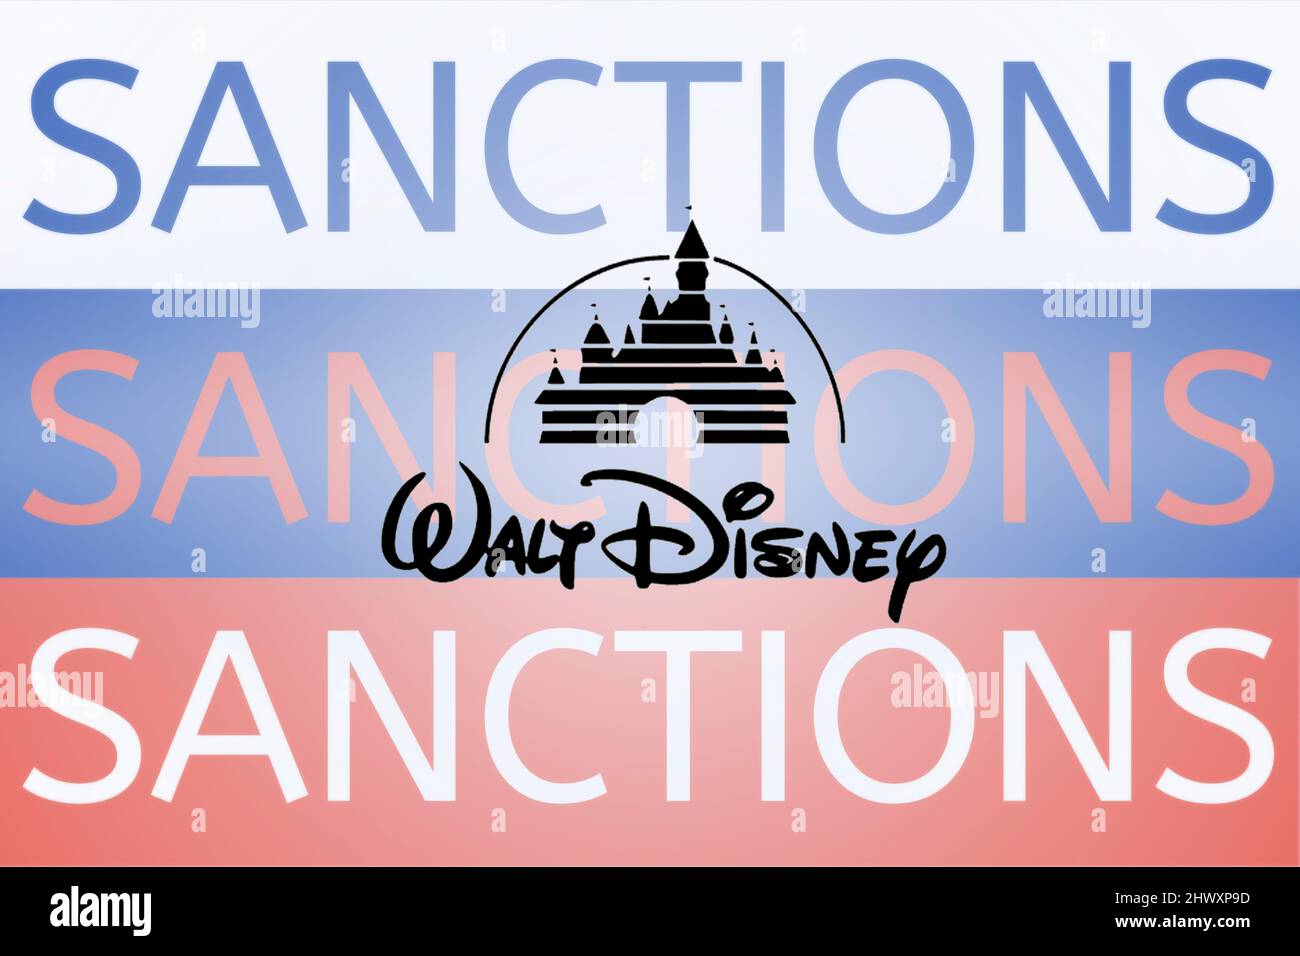 Walt Disney logo in front of the Russian flag. Sanctions against Russia over its invasion of Ukraine. March 2022, San Francisco, USA Stock Photo